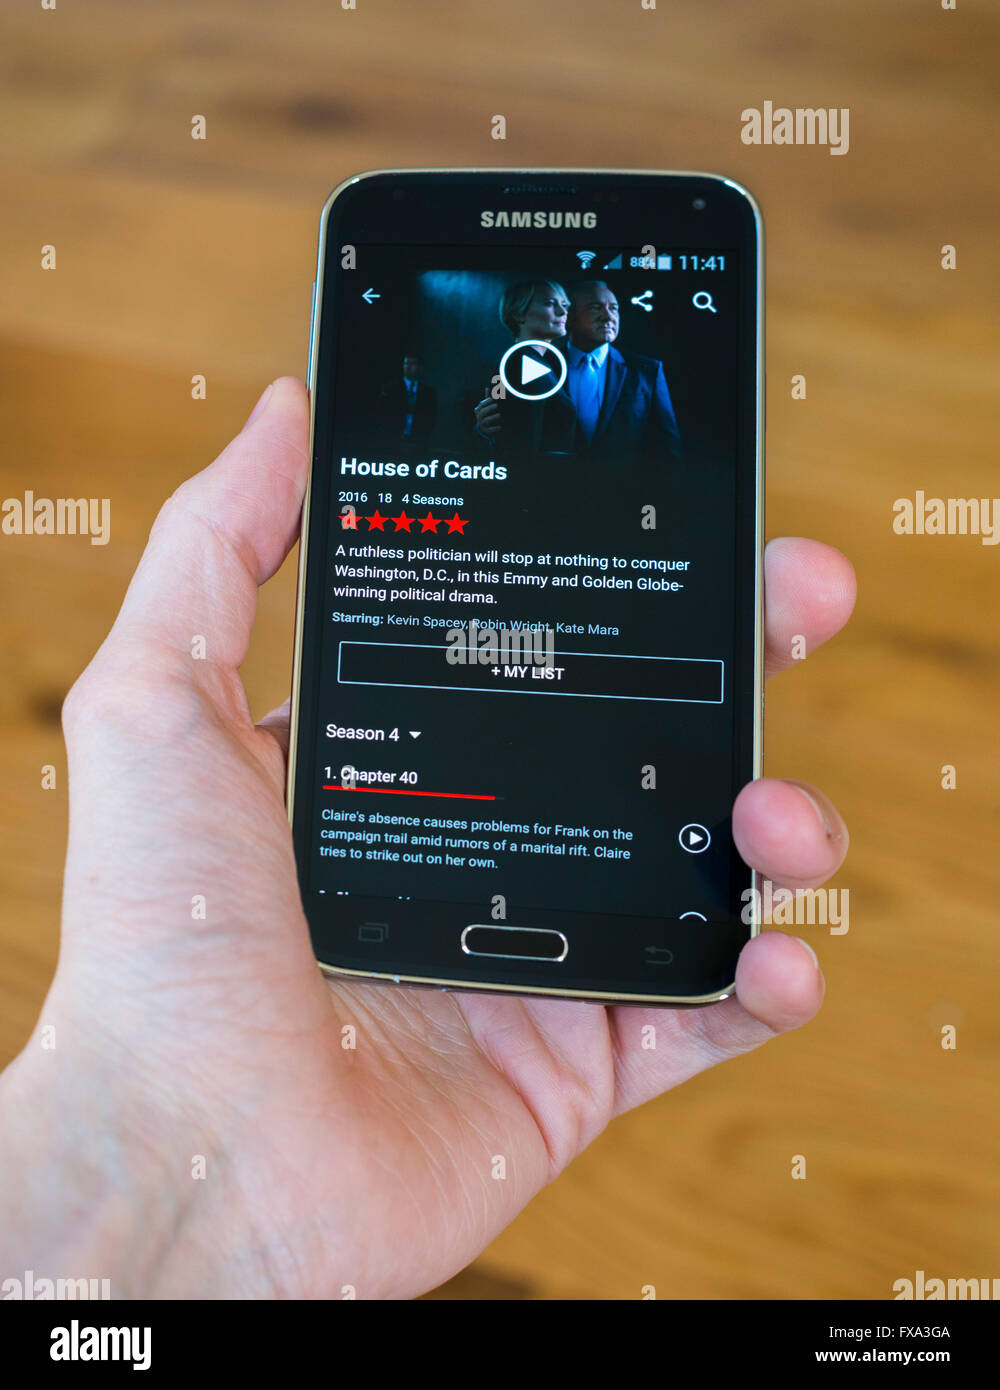 A hand holding a Samsung phone with the Netlfix app open, showing the tv show House of Cards. Stock Photo